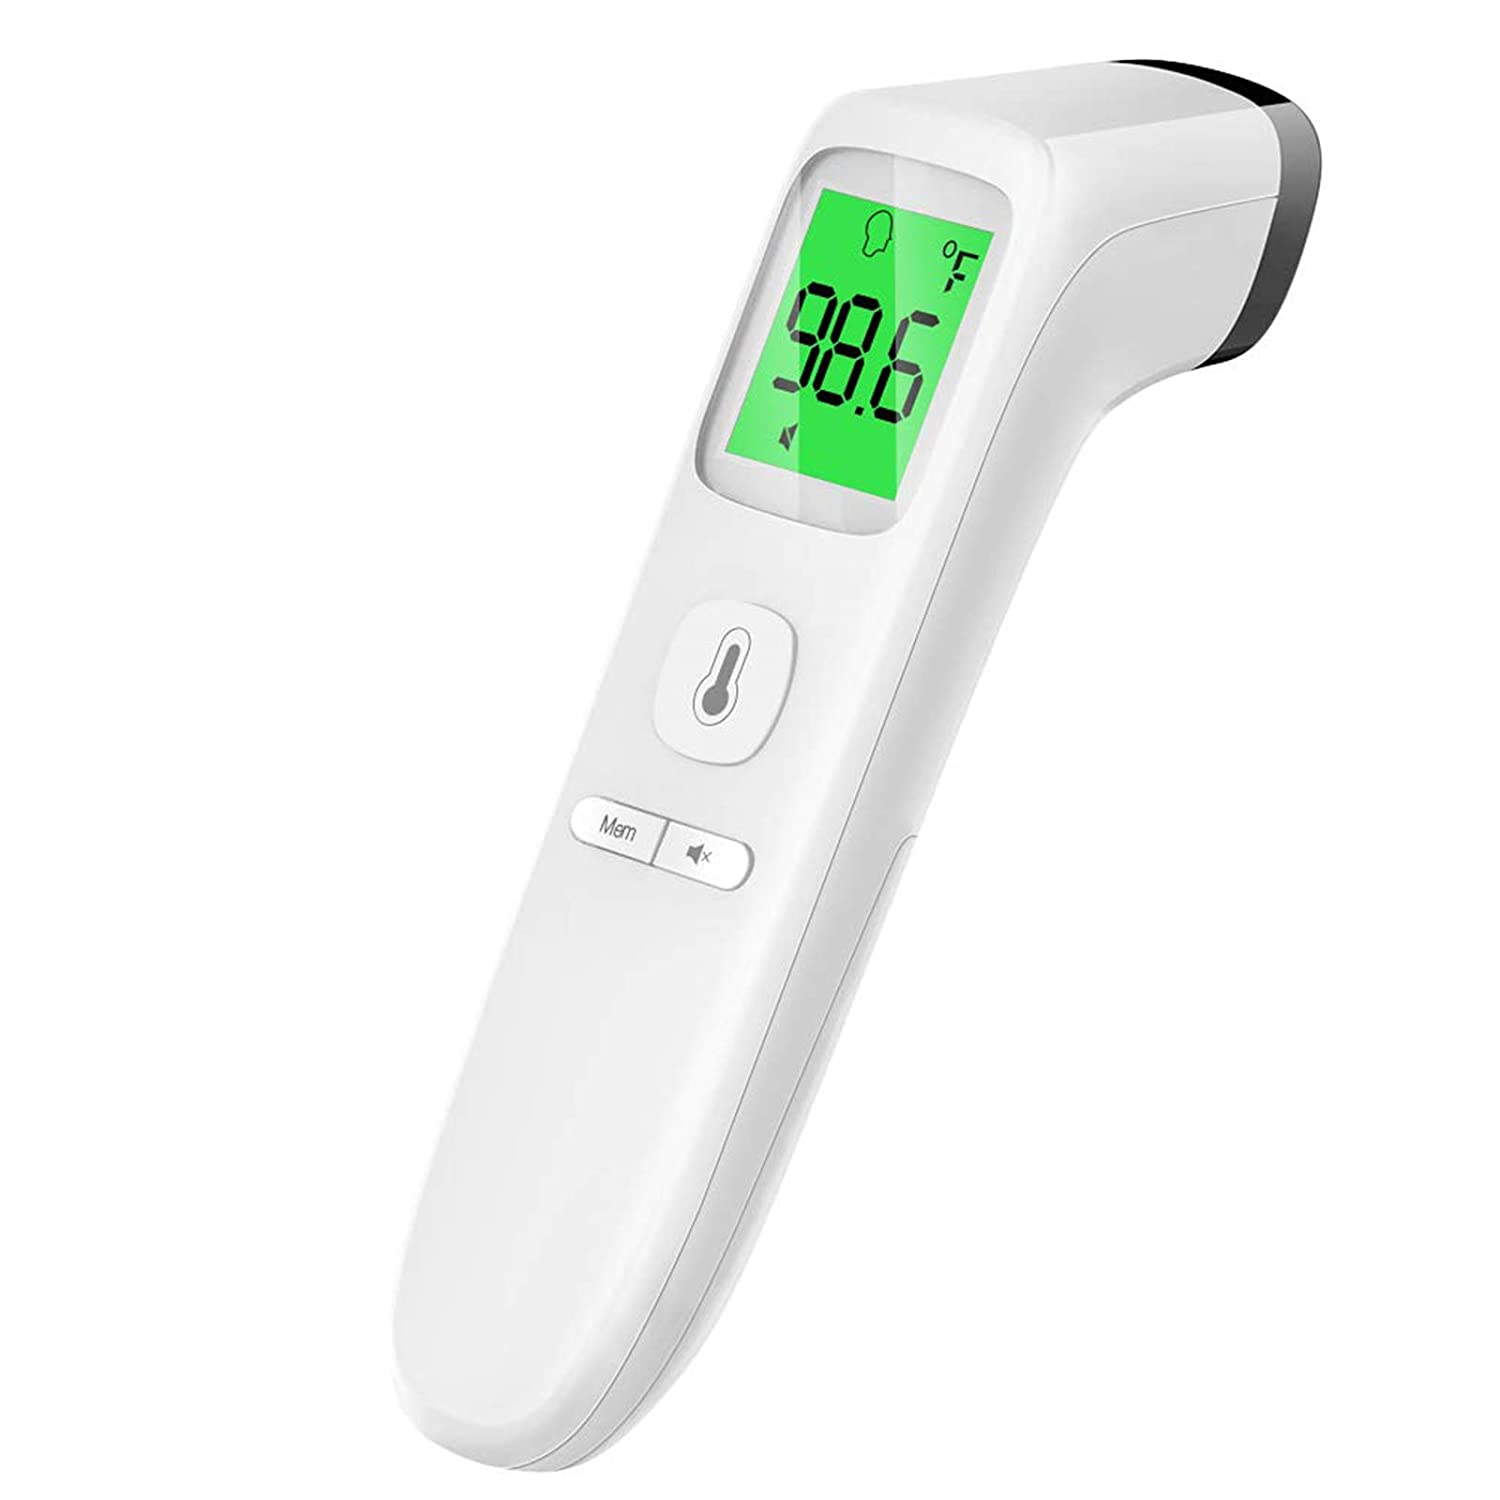 Touchless Forehead Thermometer with Fever Alarm and Memory Function $10